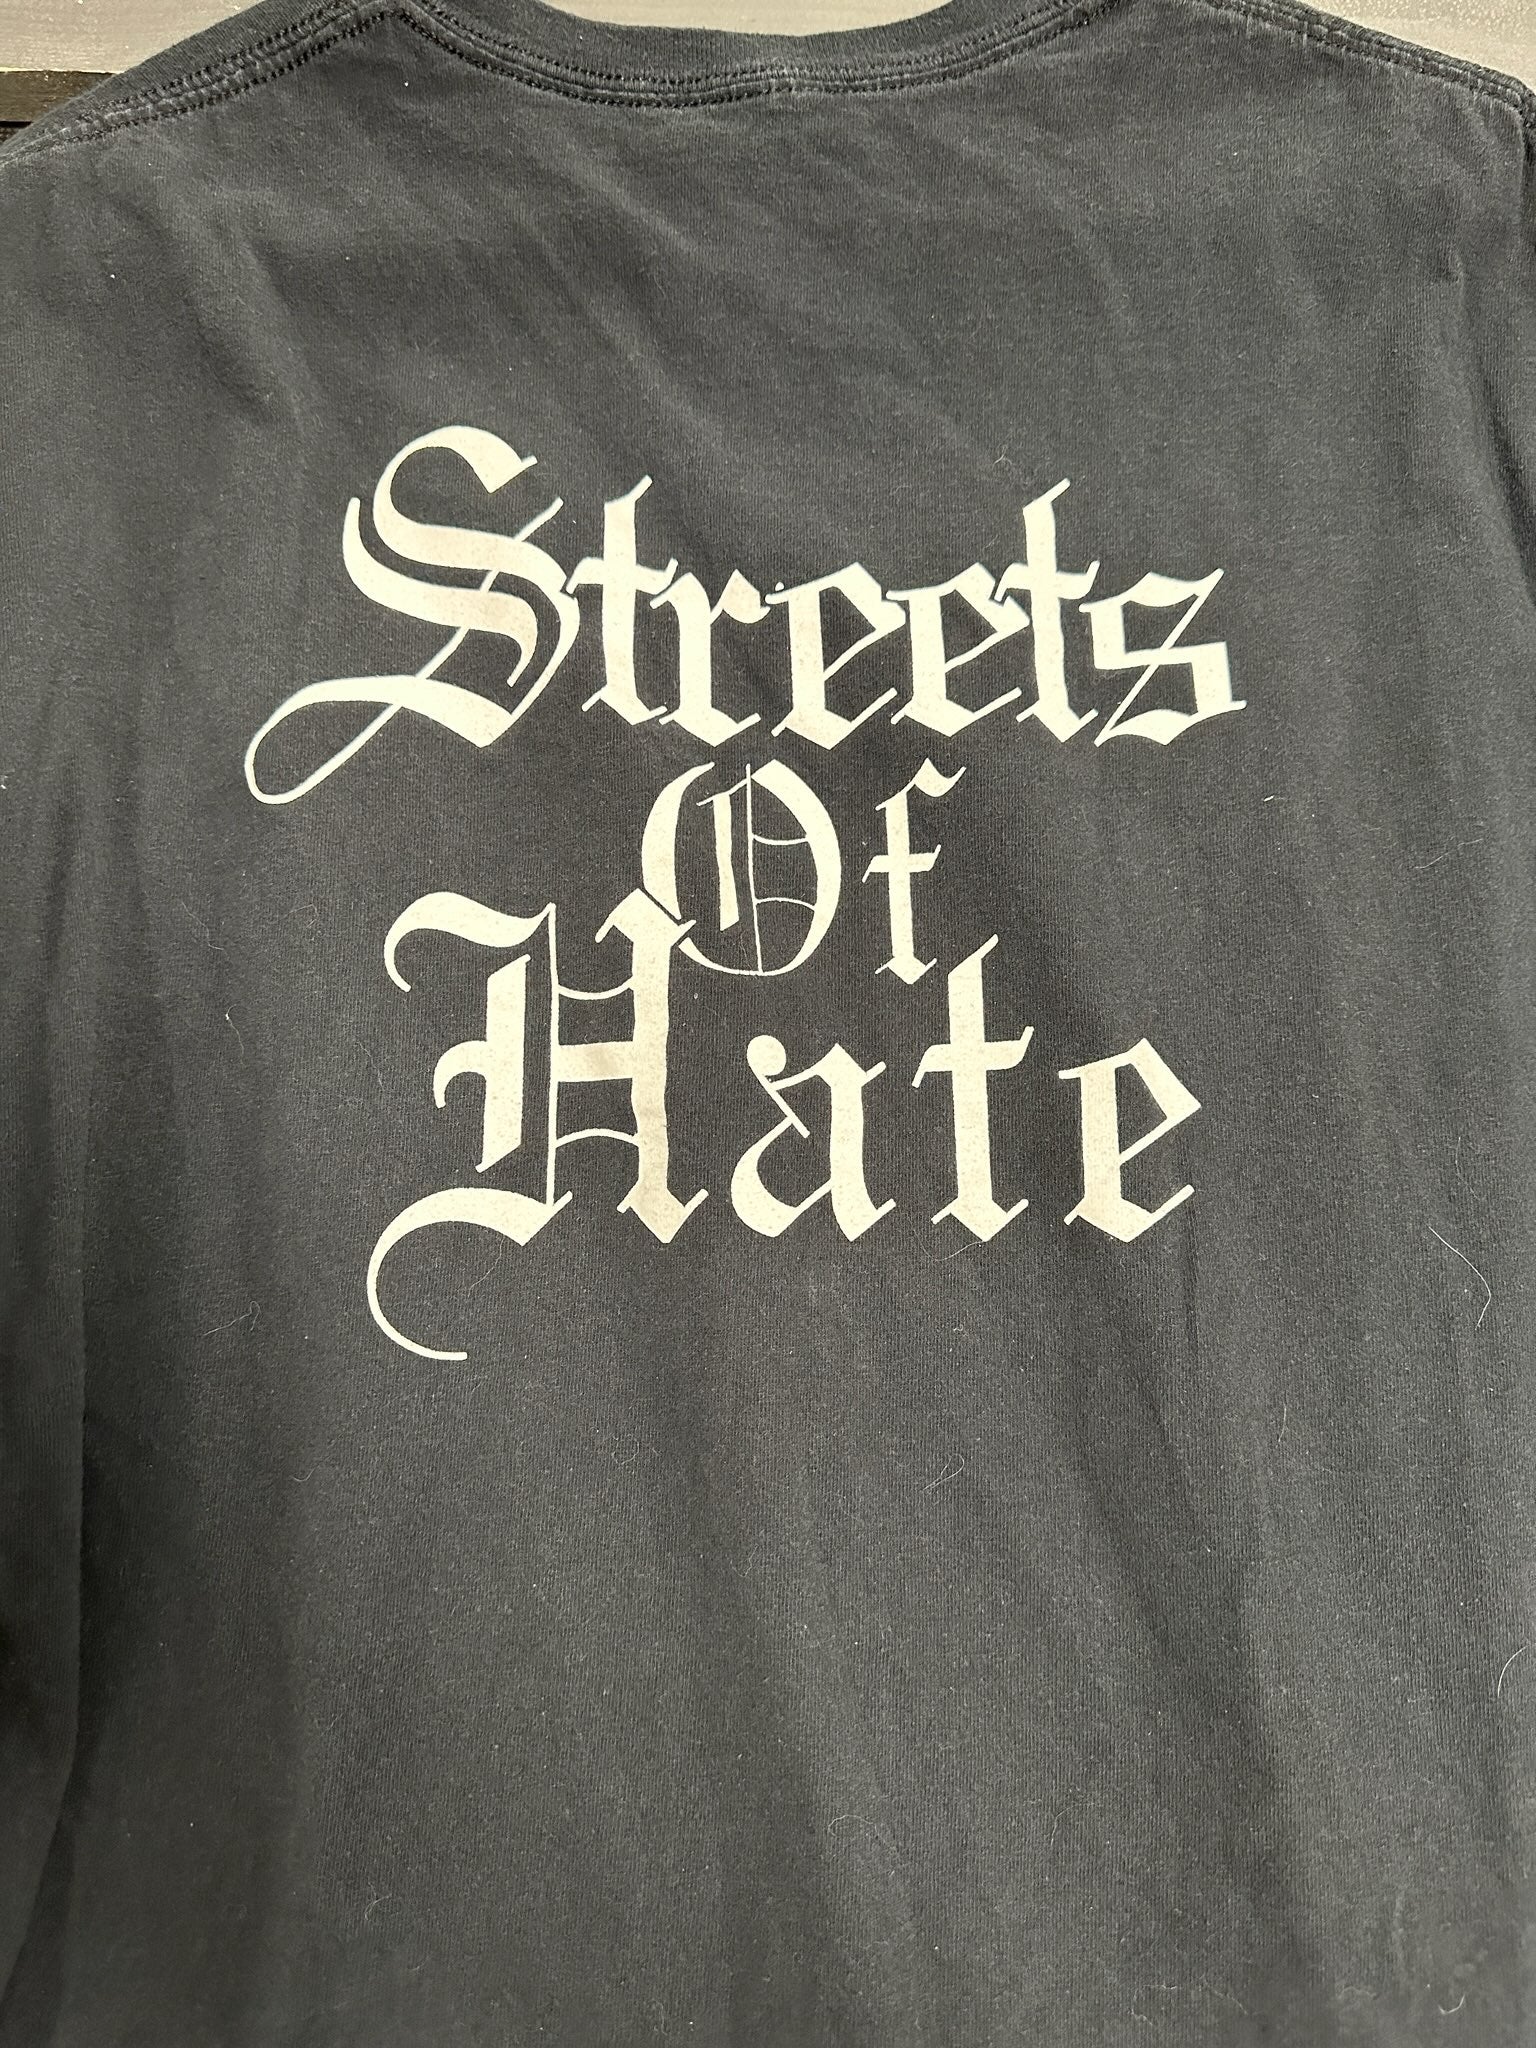 Streets Of Hate Crown Logo T-Shirt, Blk, XL - Darkside Records